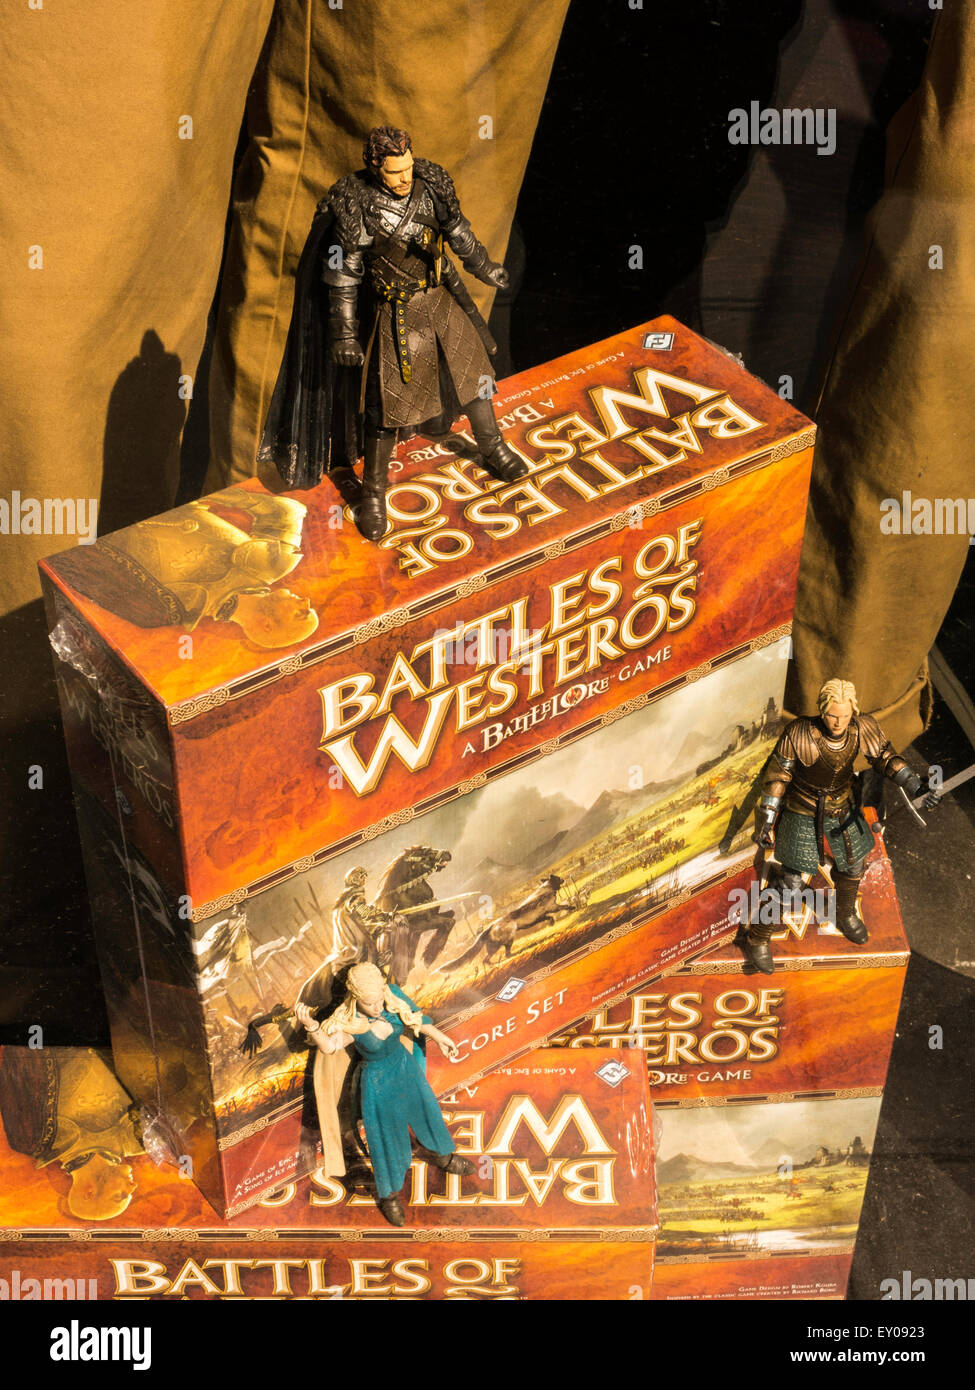 Battles of Westeros. BattleLore Game, Game of Thrones  HBO Television Show, HBO Gift Shop Display Window, NYC, USA Stock Photo